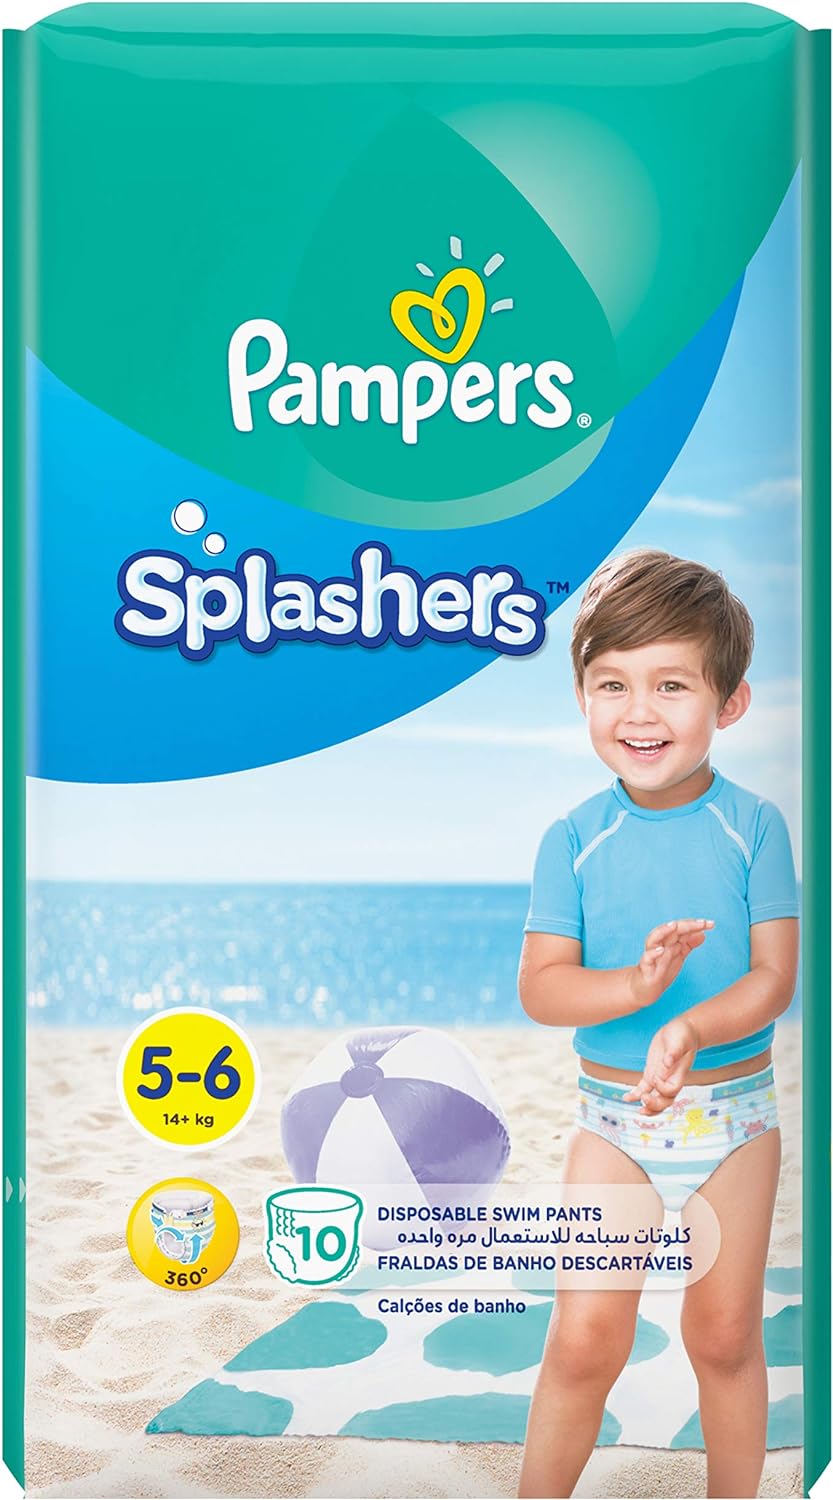 Pampers Splashers, Size 5-6, 14+ kg, Carry Pack, 10 Swim Diaper Pants